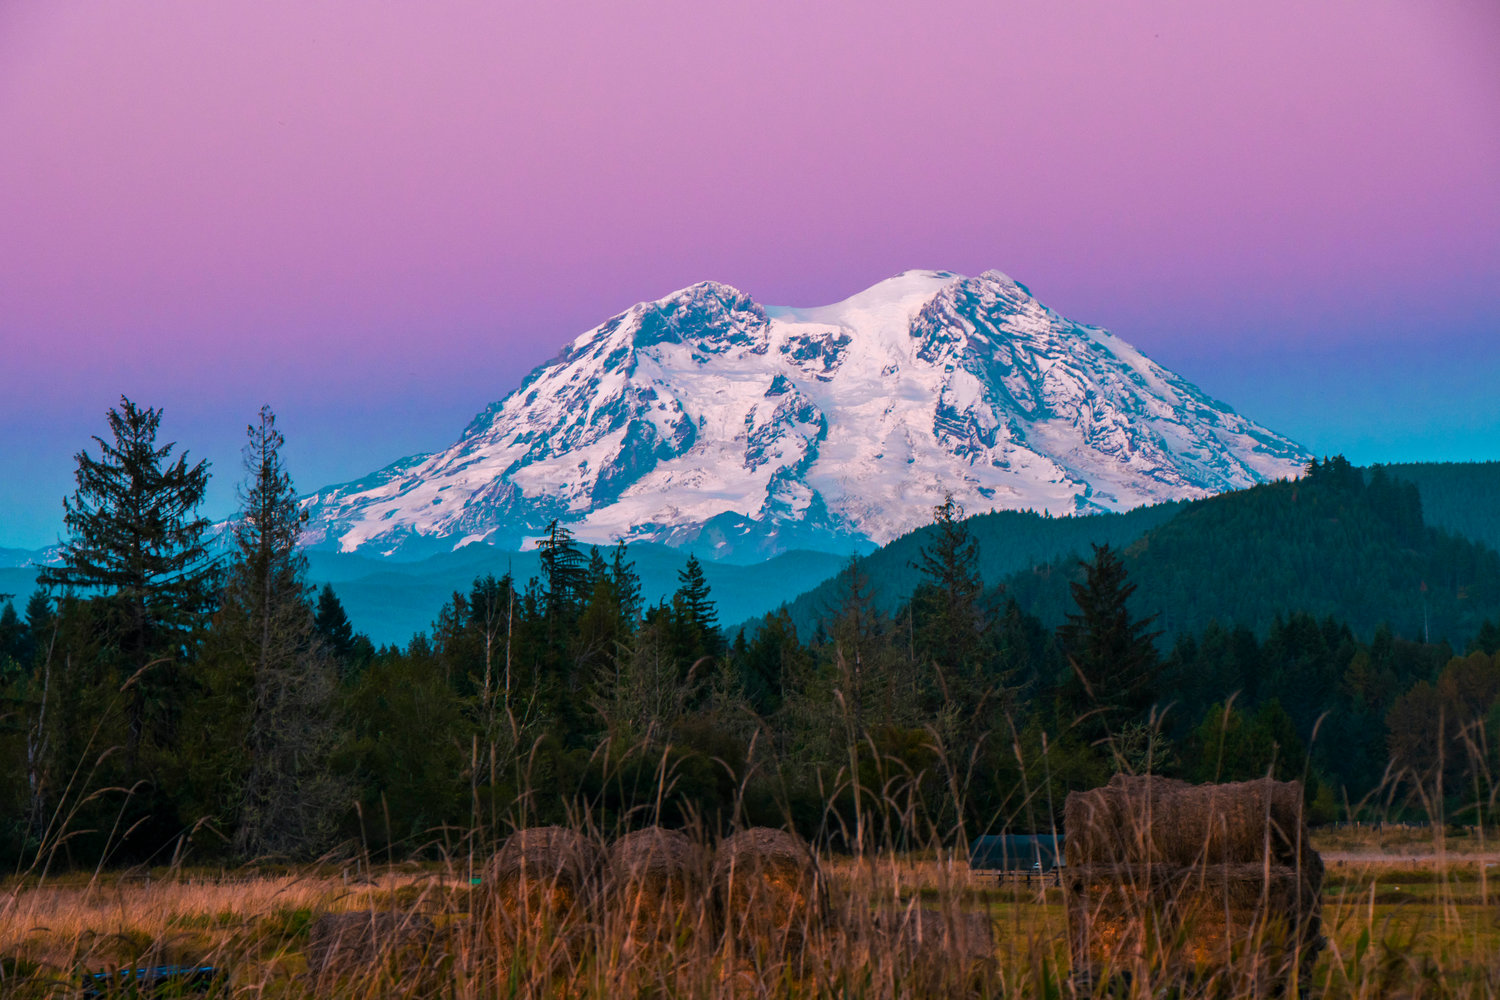 Mount Rainier beacons above foothills at sunset seen from Highway 7.